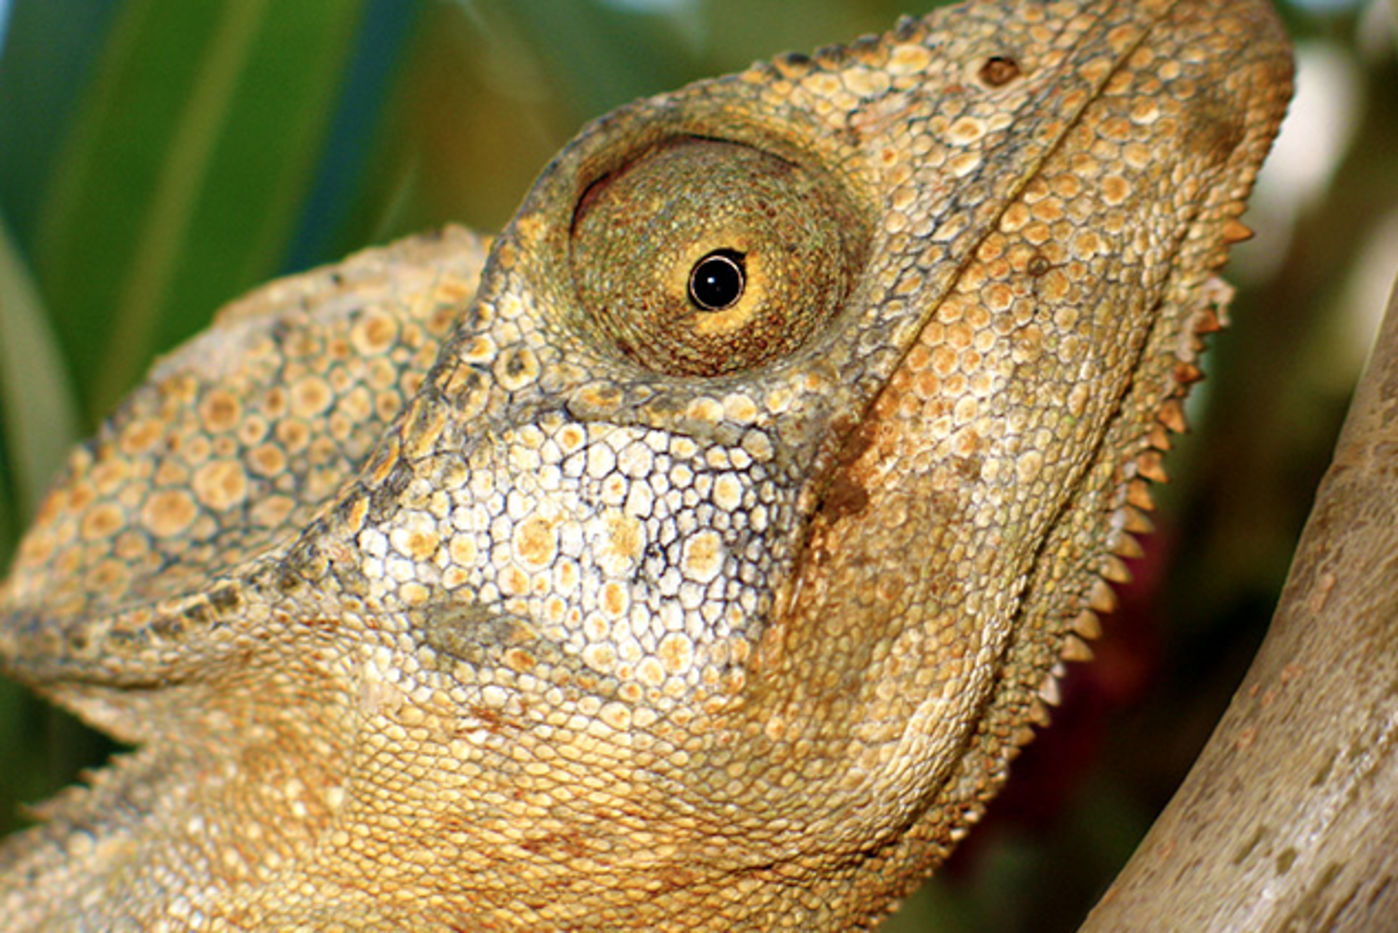 A close-up of a beige lizard's eye and head